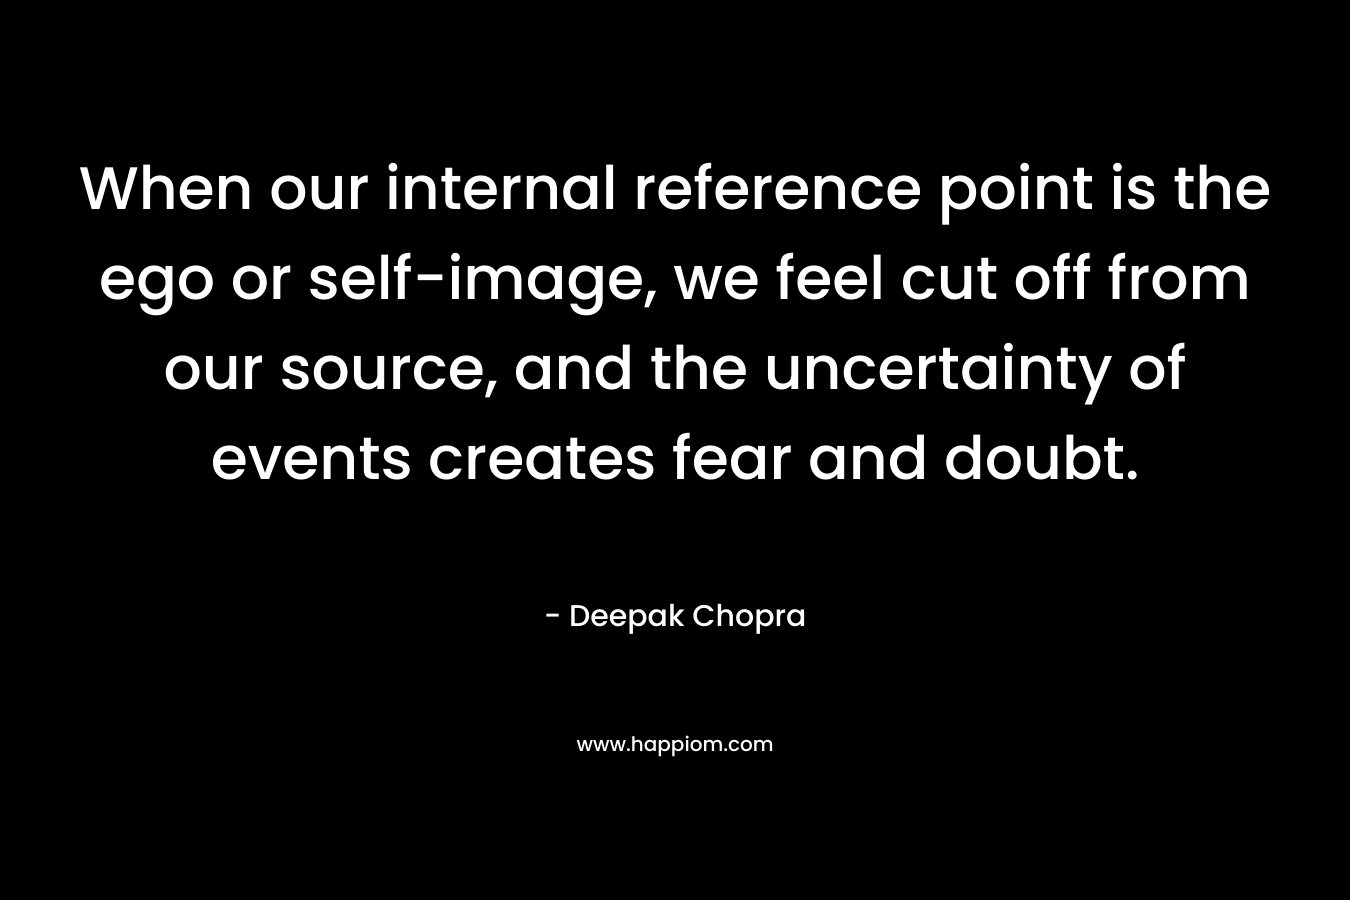 When our internal reference point is the ego or self-image, we feel cut off from our source, and the uncertainty of events creates fear and doubt. – Deepak Chopra